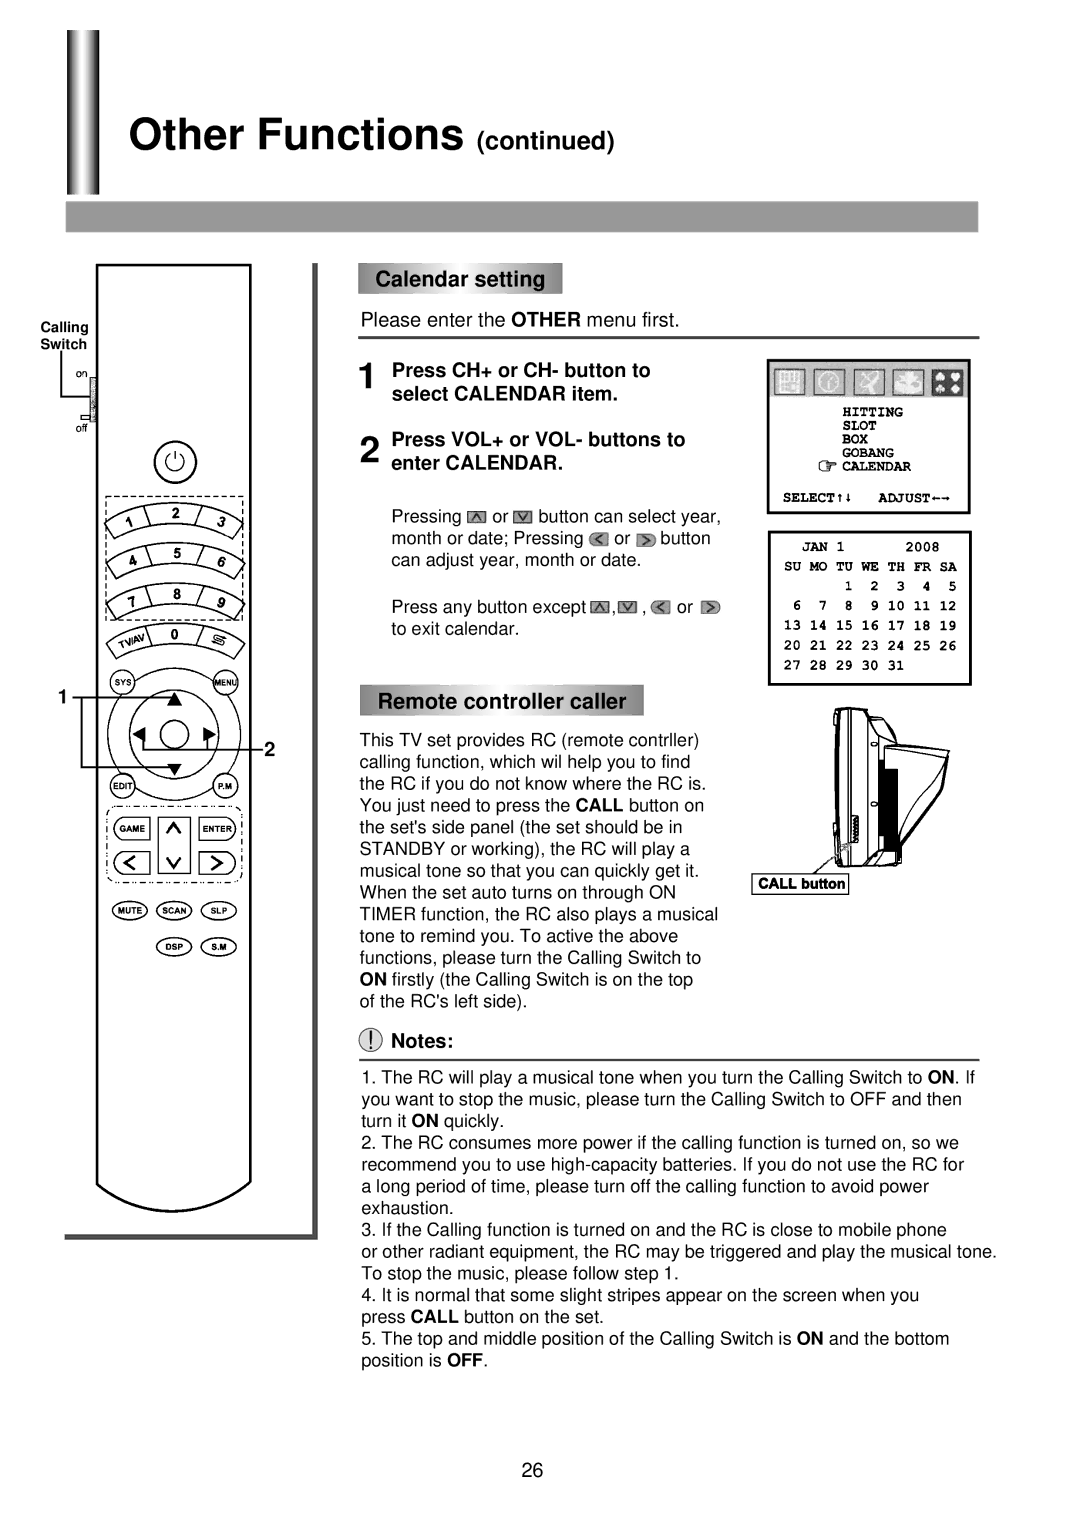 Palsonic 6825G owner manual Other Functions, Calendar setting, Remote controller caller 